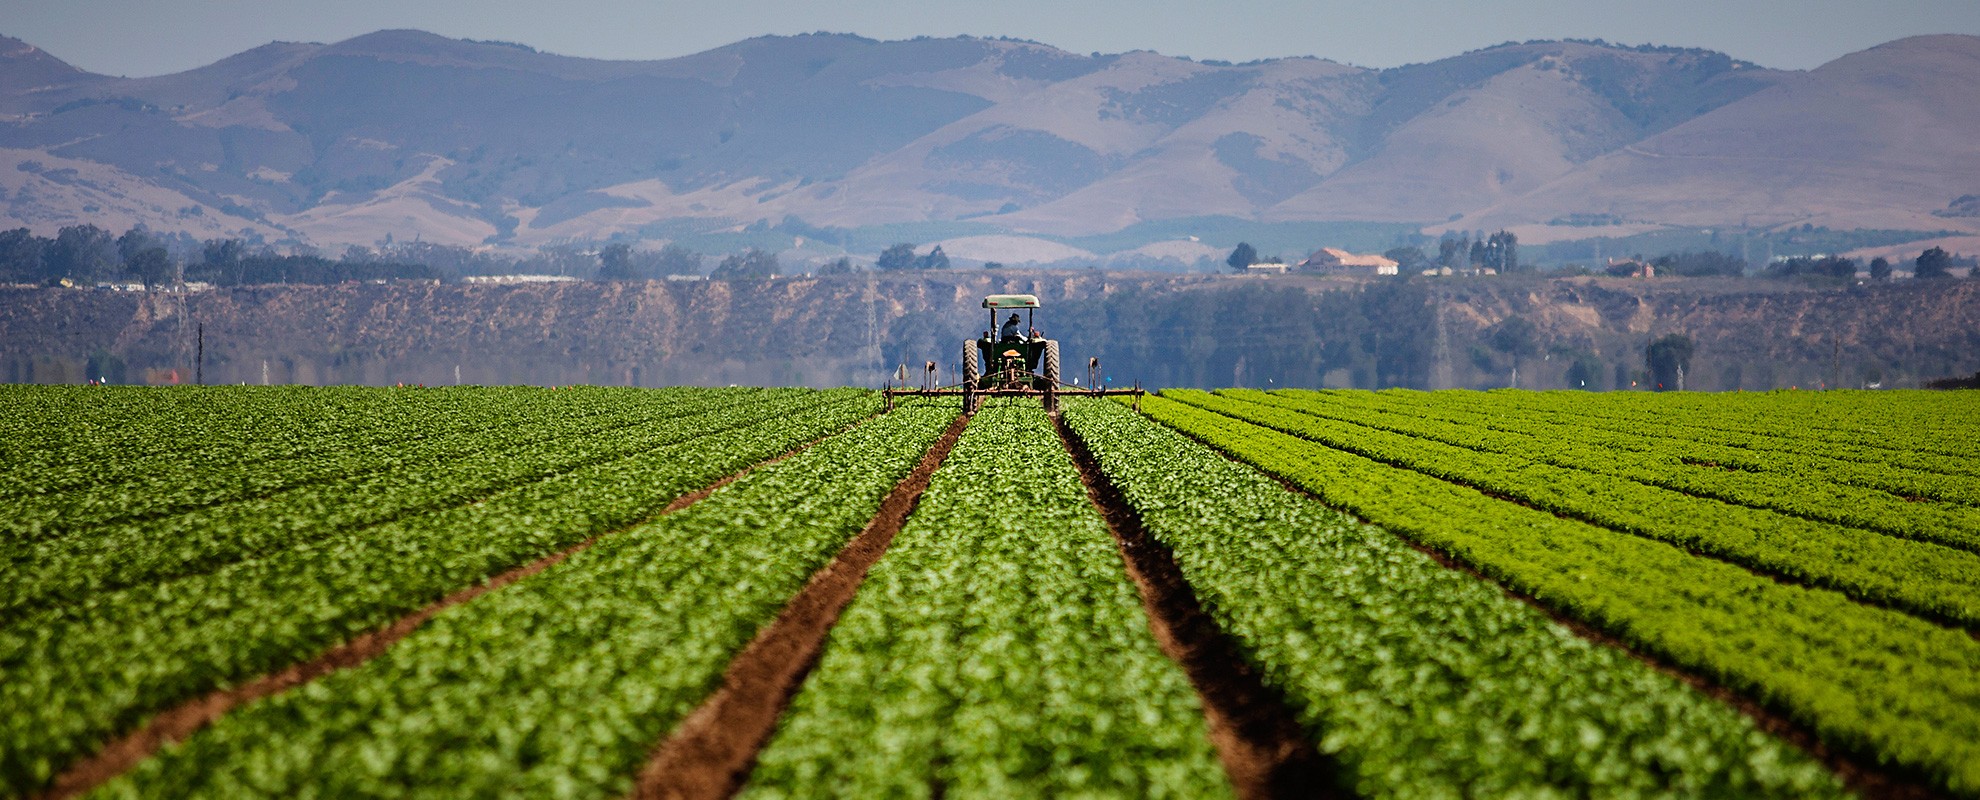 A tractor works a farm field in Southern California.